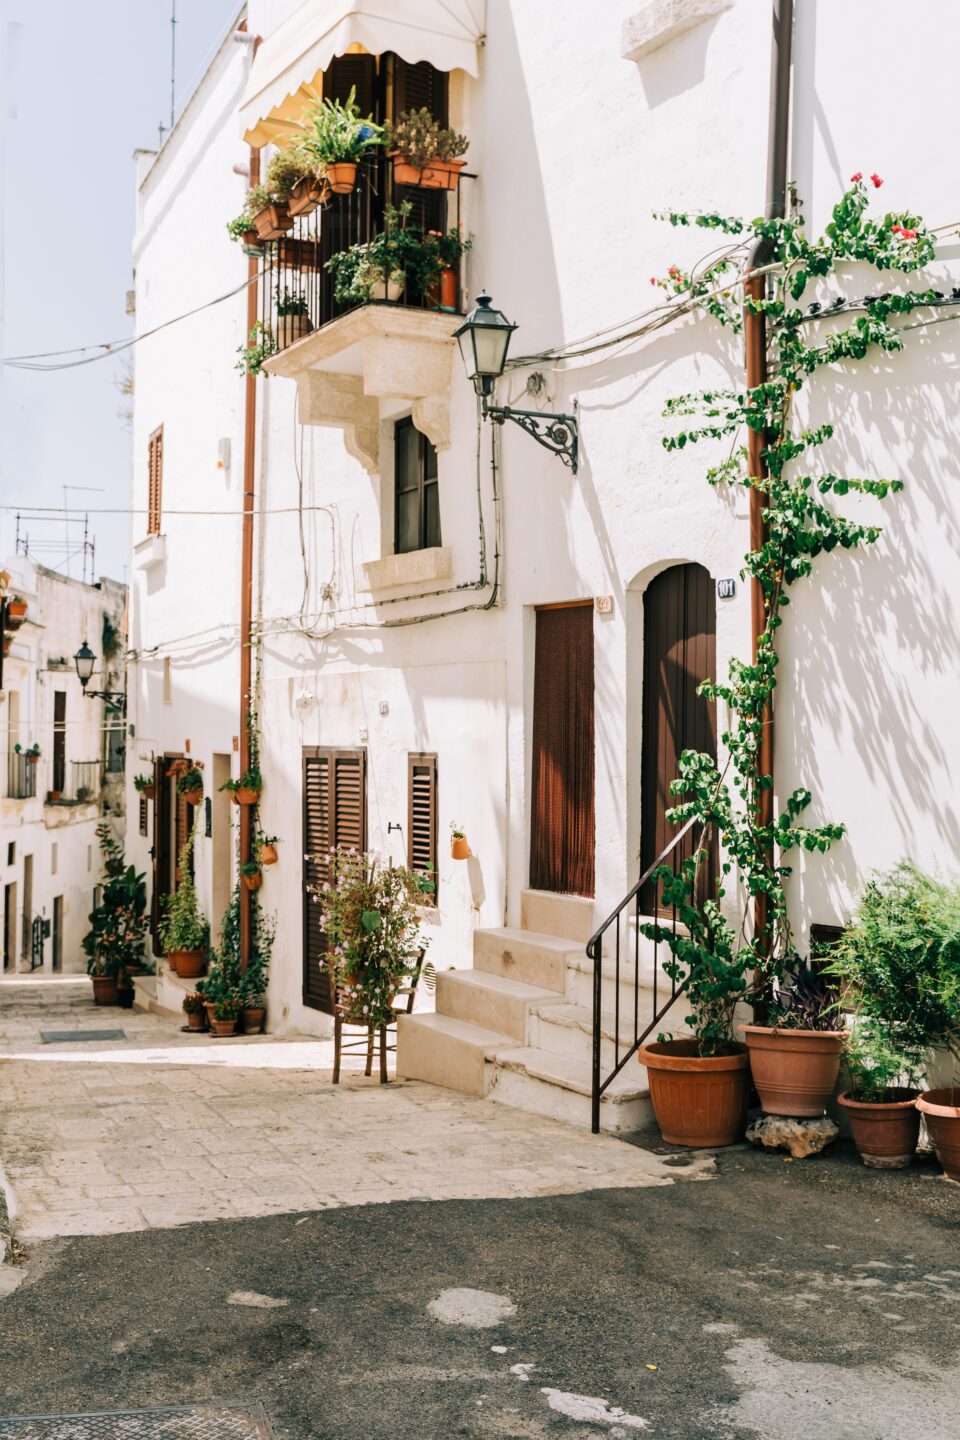 Sunny Italian street with potted plants and white buildings.